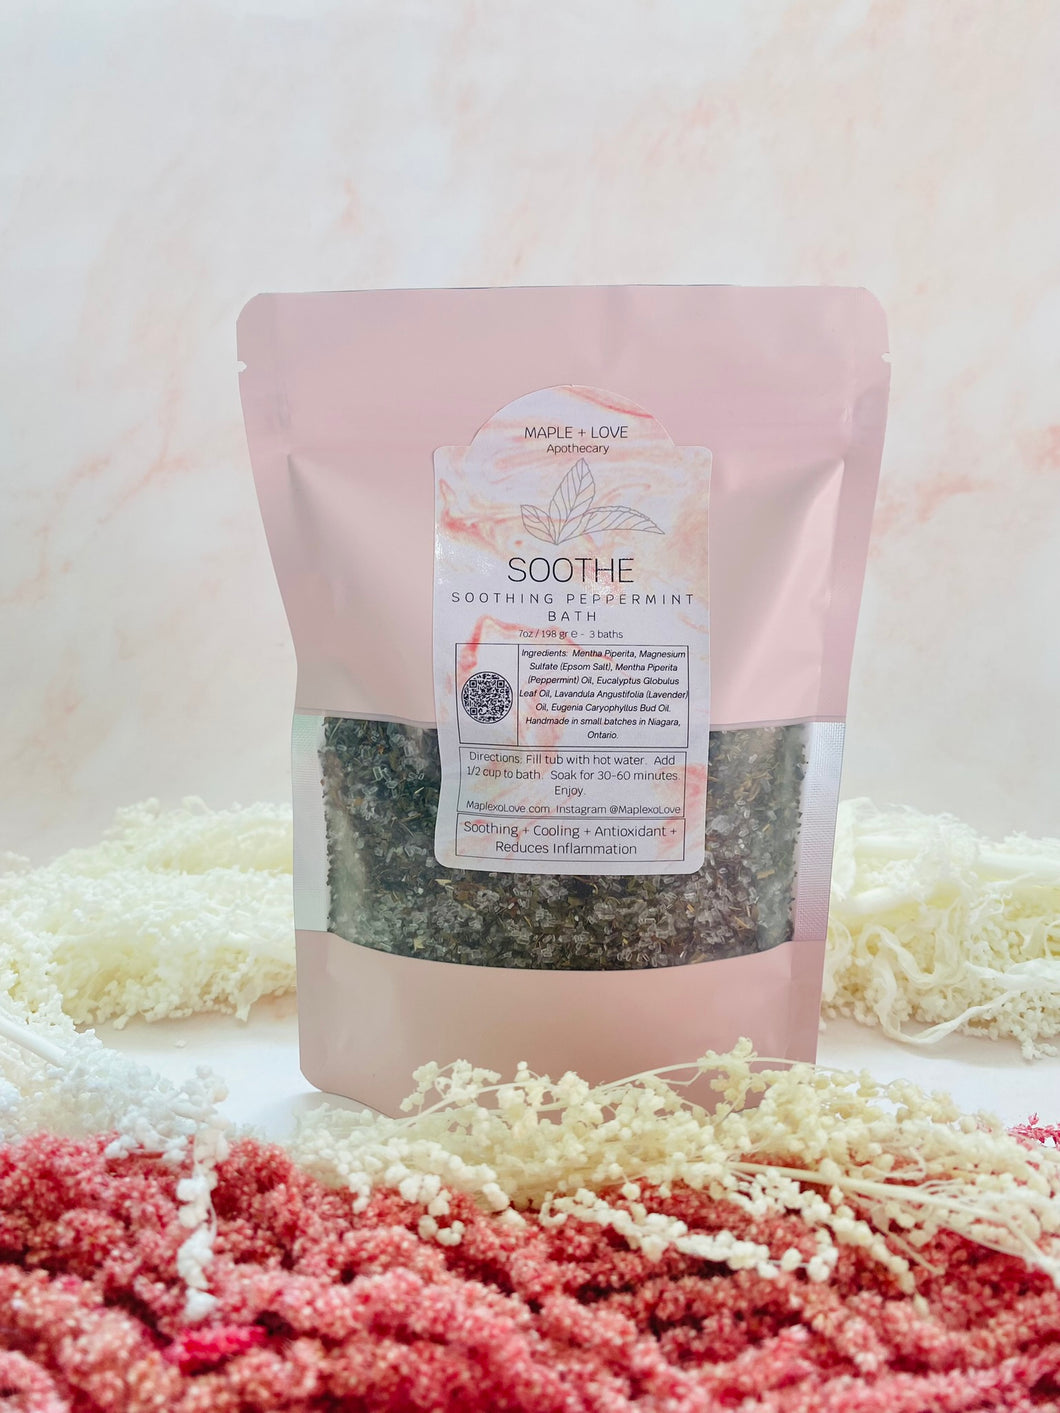 SOOTHE - Soothing Peppermint Bath